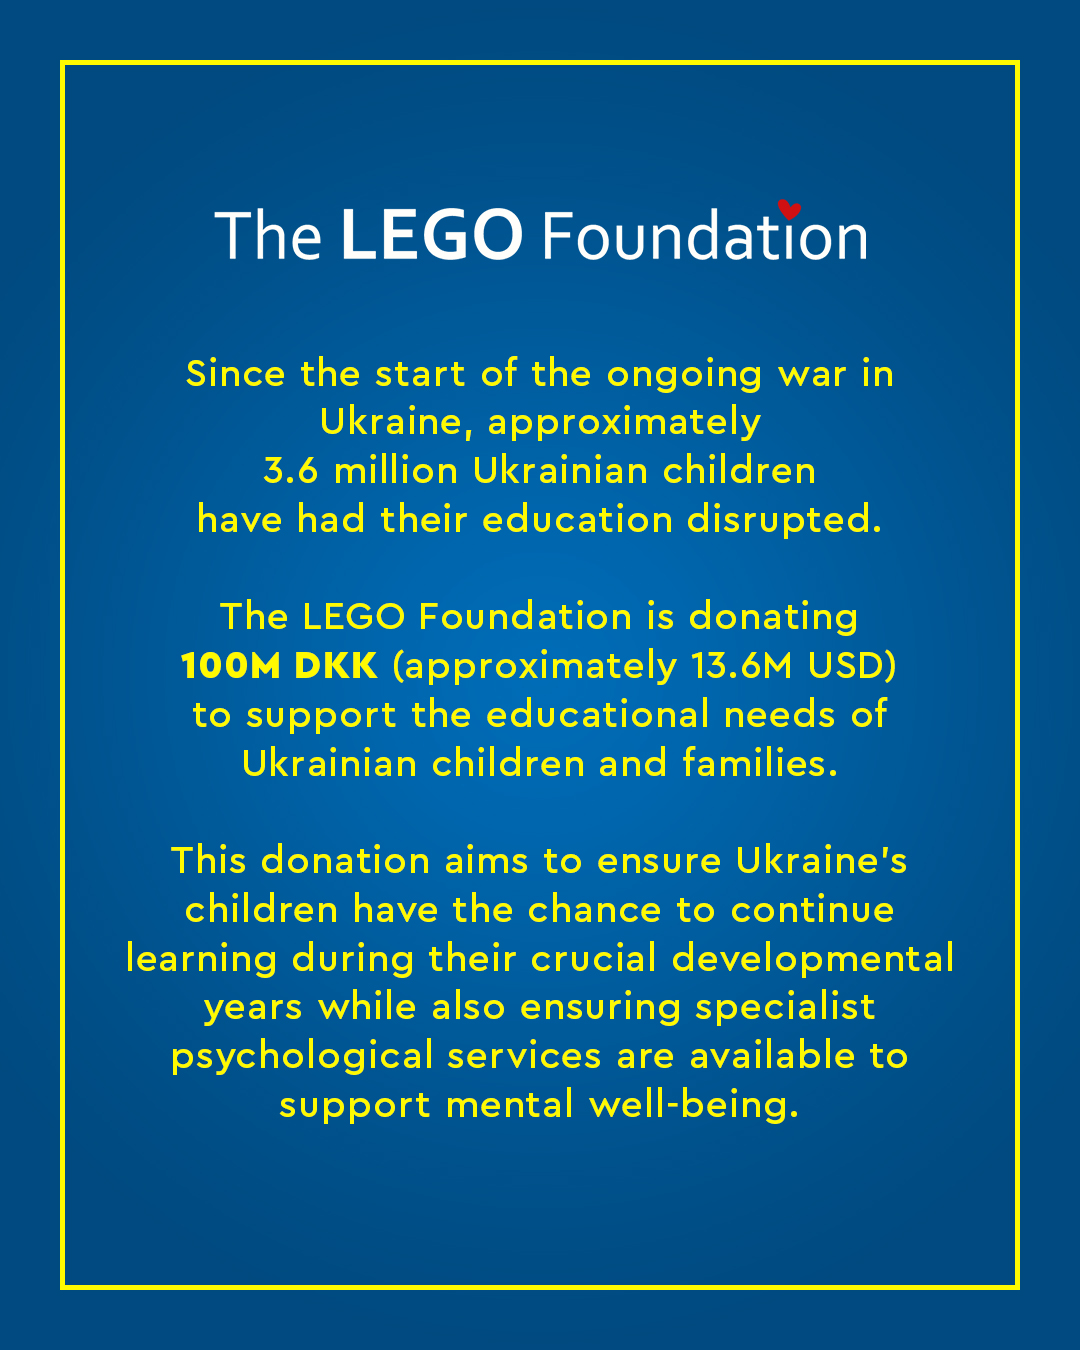 LEGO on Twitter: "The LEGO Foundation is donating US$13.6M / 100M DKK to support the rehabilitation and of education system and the educational needs of those lives have been